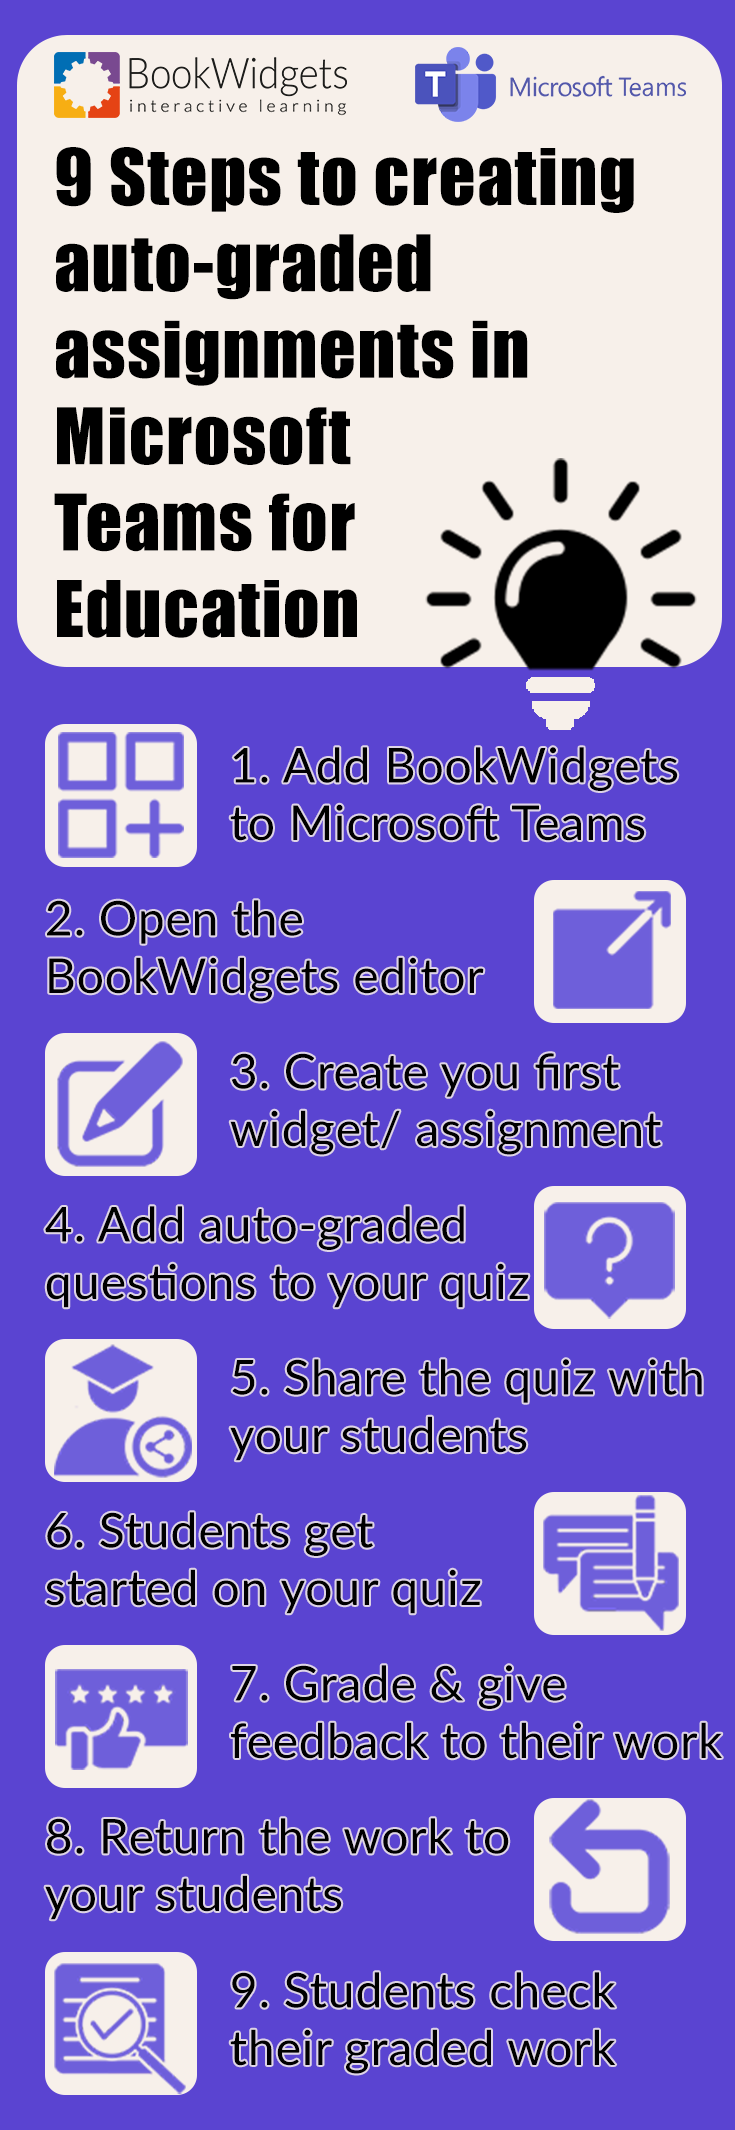 9 steps to creating auto-graded assignments in Microsoft Teams for education